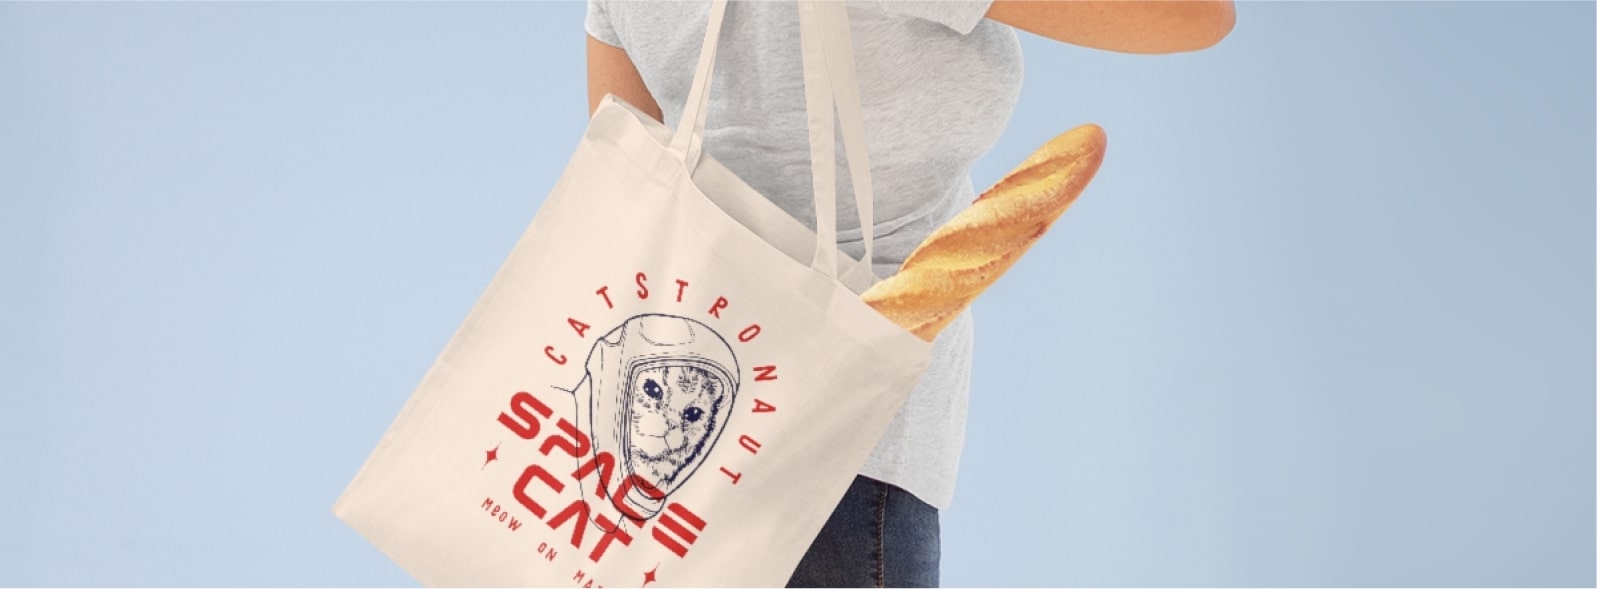 An image of a woman holding a customized tote bag on her shoulder with a baguette inside.